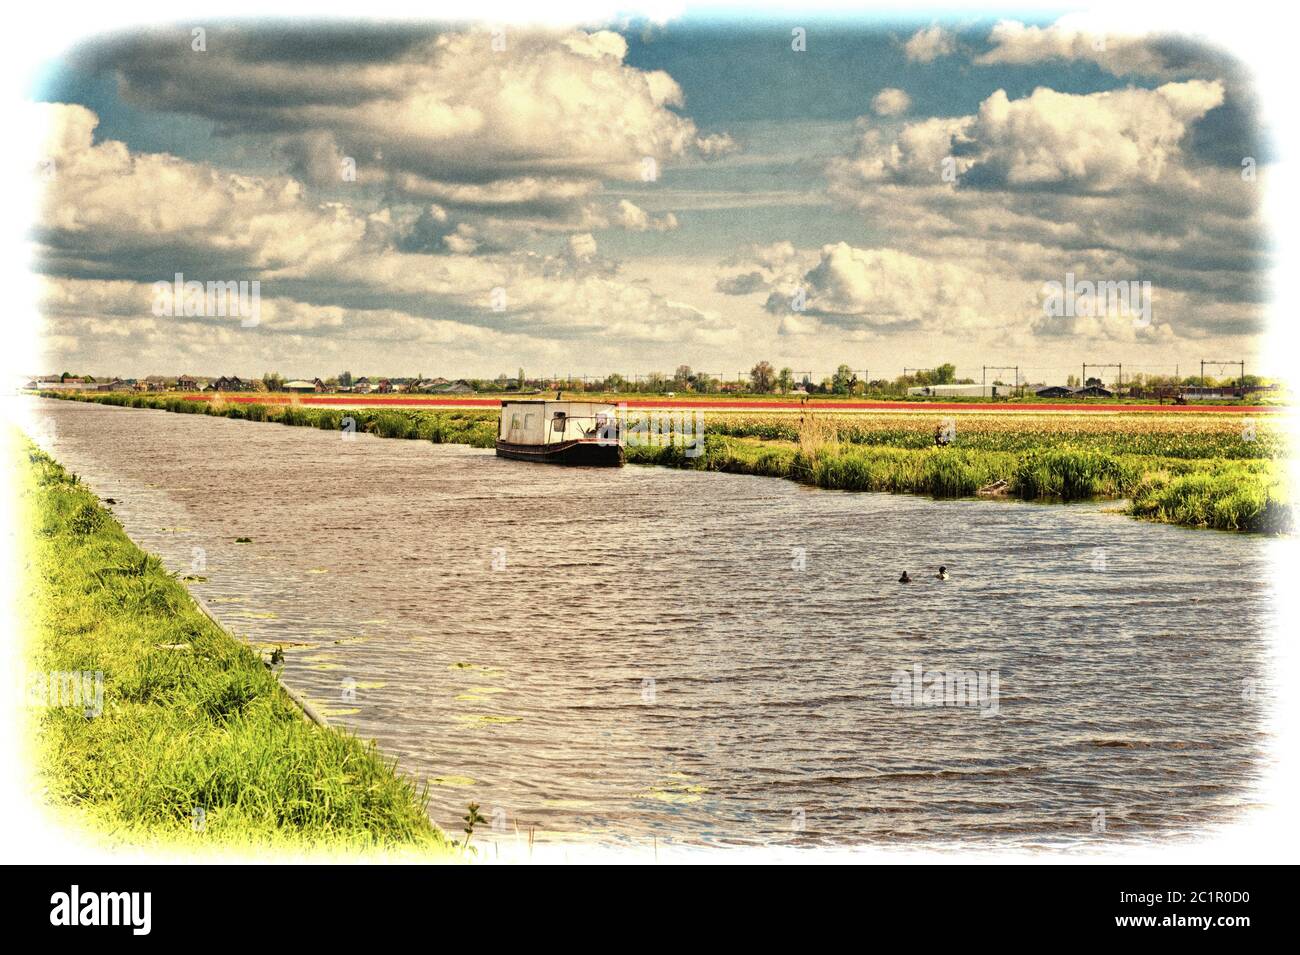 Houseboat on the Irrigation Canal Stock Photo